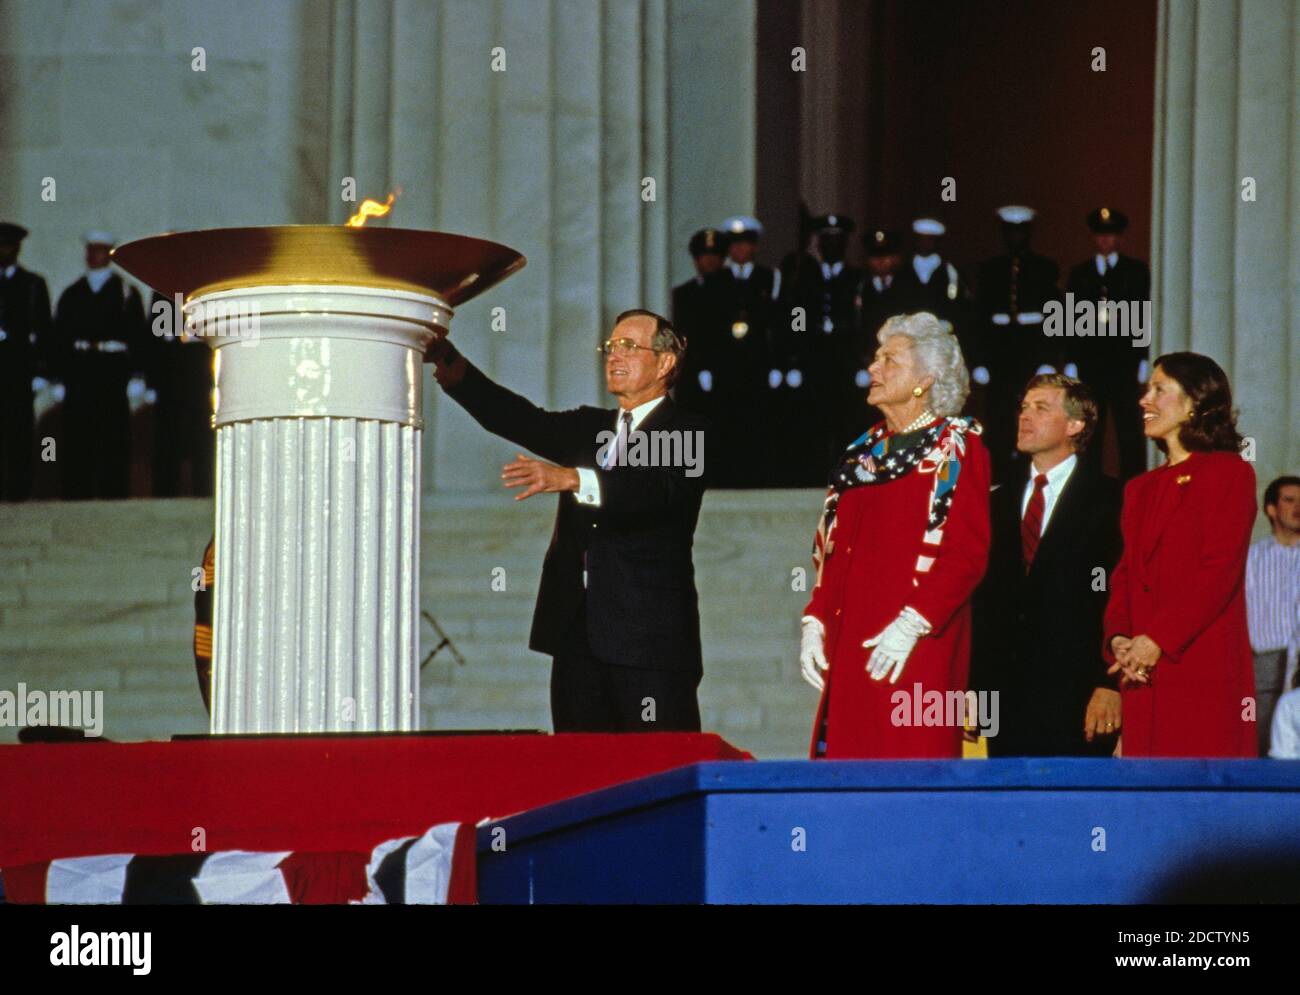 United States President-elect George H.W. Bush participates in the ceremonial candle lighting to conclude the opening ceremony for his inauguration at the Lincoln Memorial in Washington, DC on January 18 1989. From left to right: President-elect Bush, Barbara Bush, Marilyn Quayle, and US Vice President-elect Dan Quayle. Photo by Robert Trippett / Pool via CNP /ABACAPRESS.COM Stock Photo